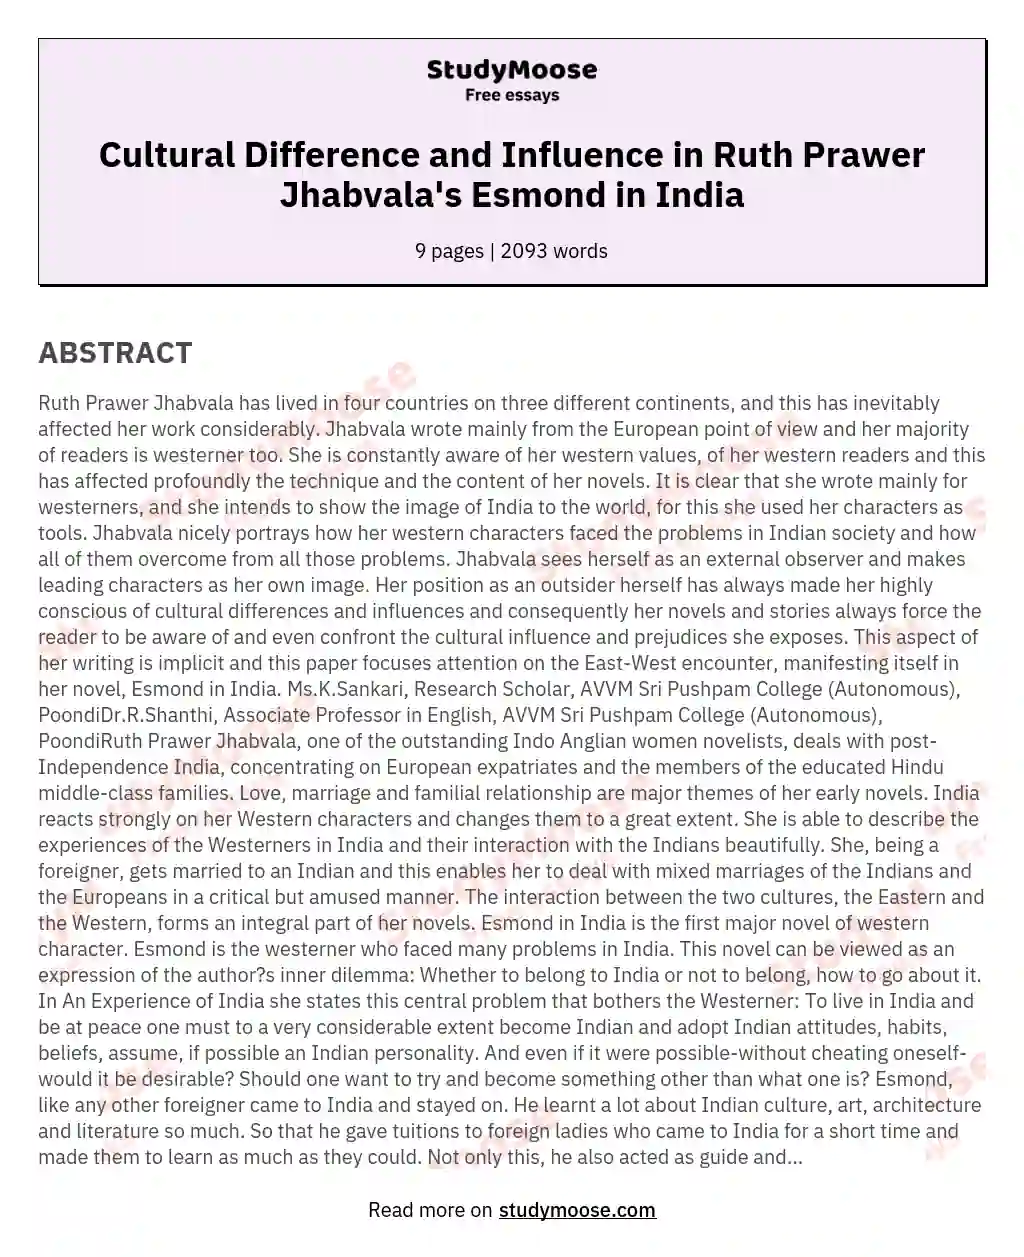 Cultural Difference and Influence in Ruth Prawer Jhabvala's Esmond in India essay